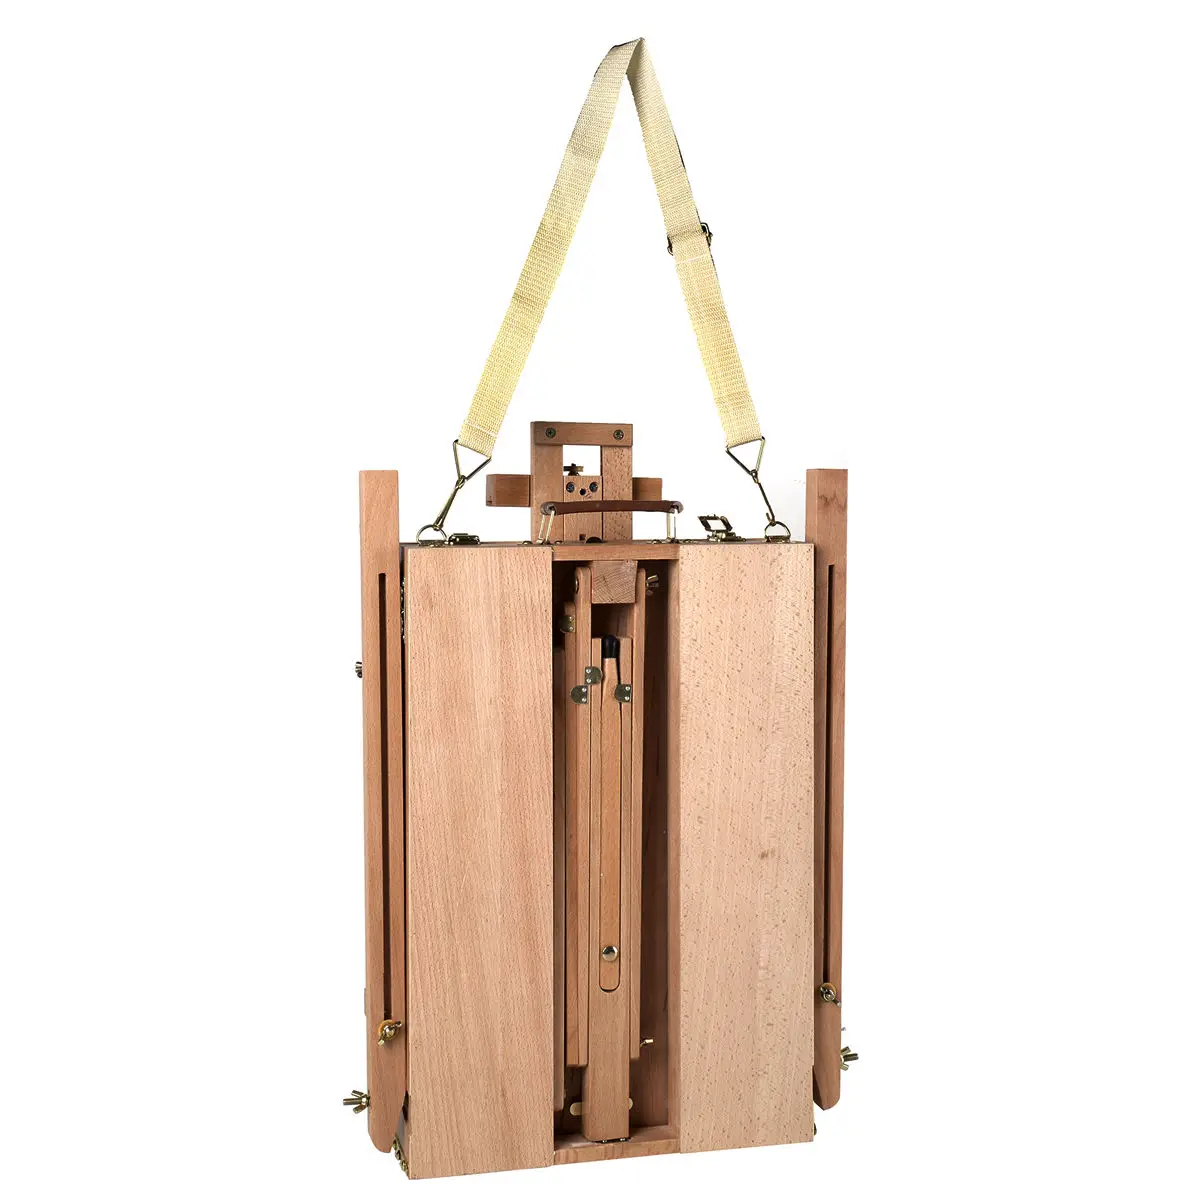 Bview Art Artist Painter Tripod Portable Wooden Sketch Box French Easel For Artist Painting